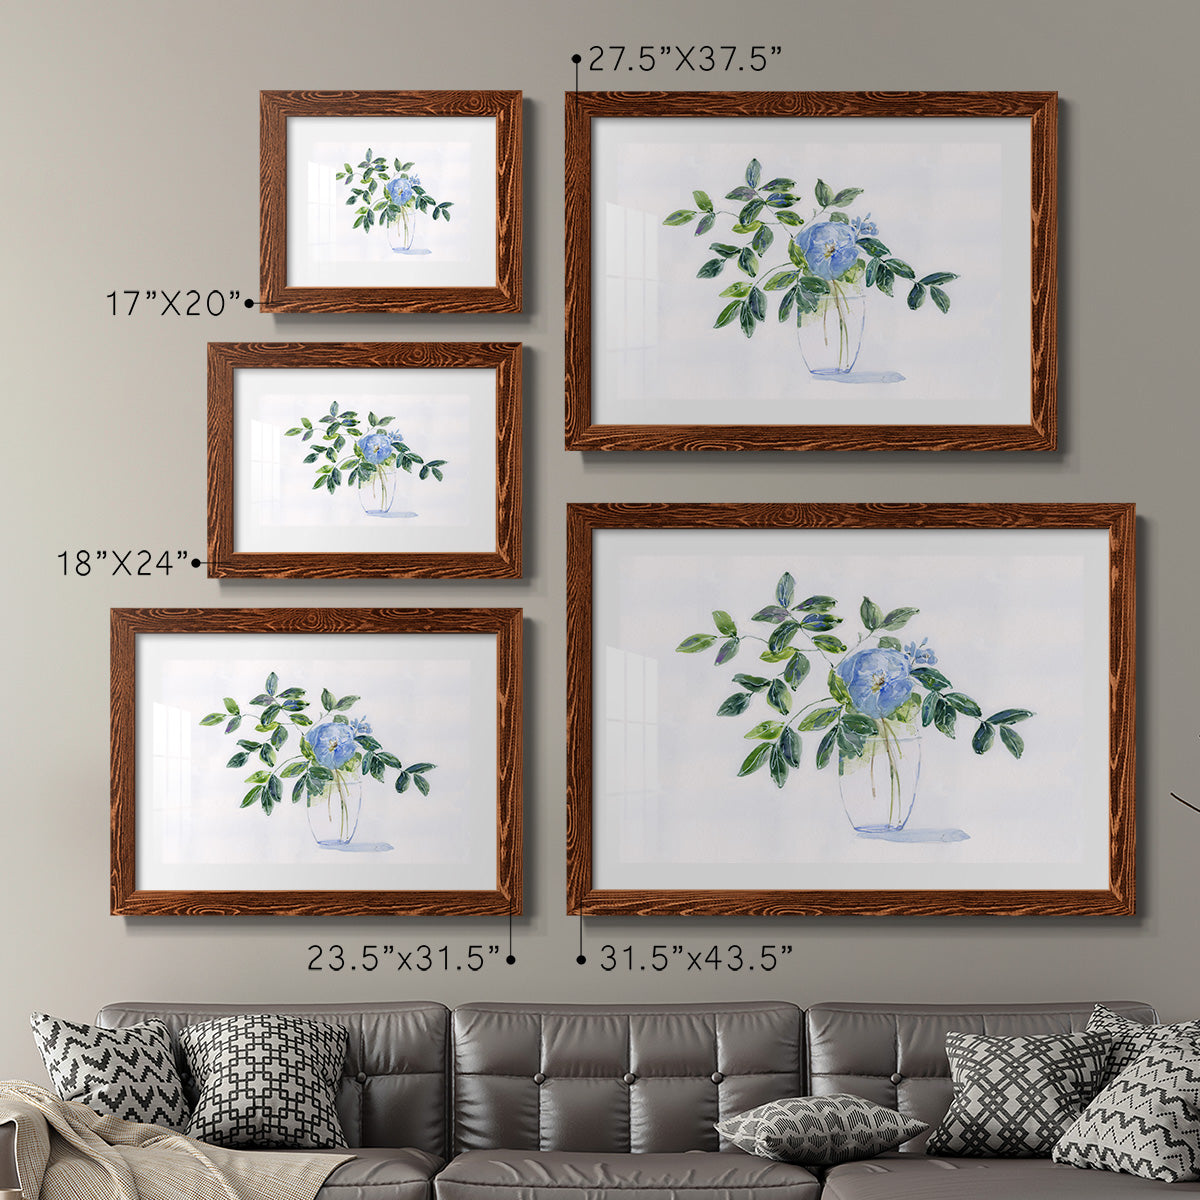 Rustic Simplicity I-Premium Framed Print - Ready to Hang